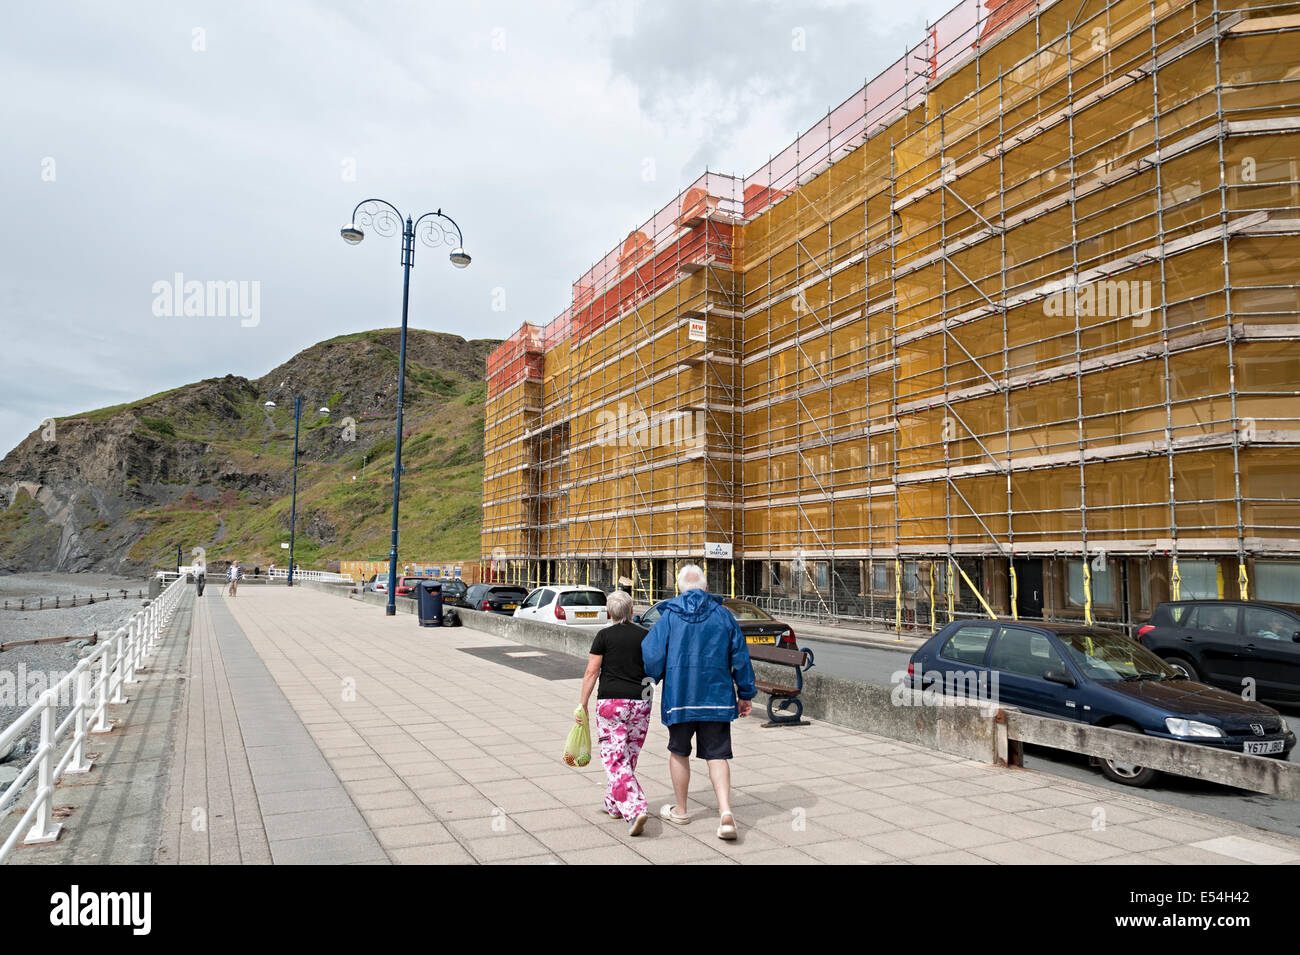 aberystwyth wales promenade sea front reconstruction of hotels after storms of 2014 Stock Photo